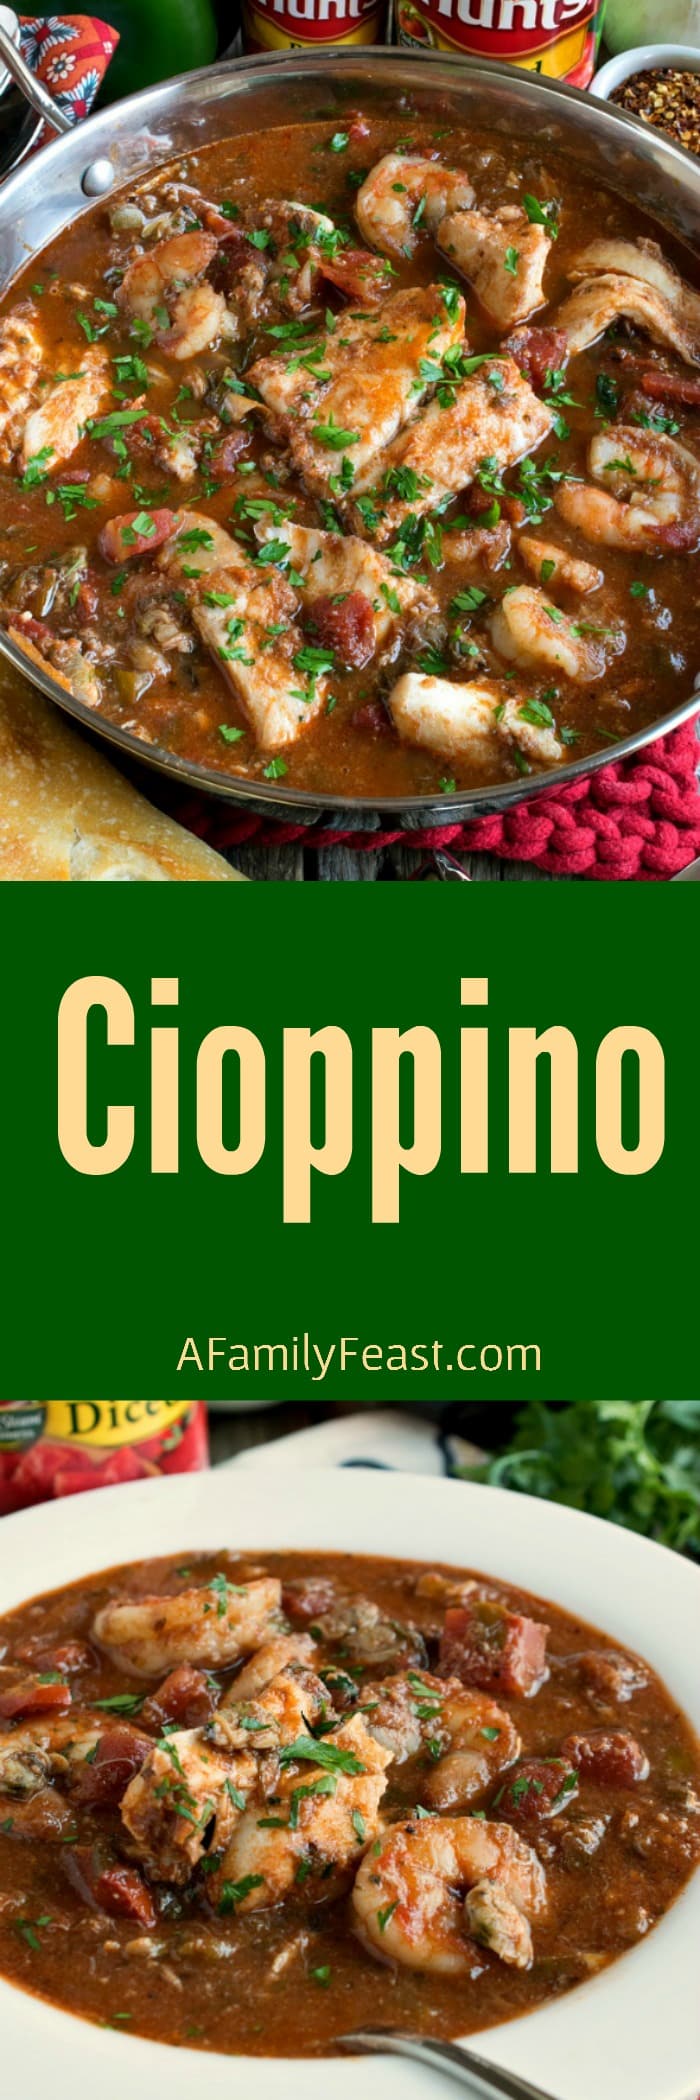 Cioppino - A classic Italian, tomato-based "Catch of the Day" seafood stew with fantastic flavor!